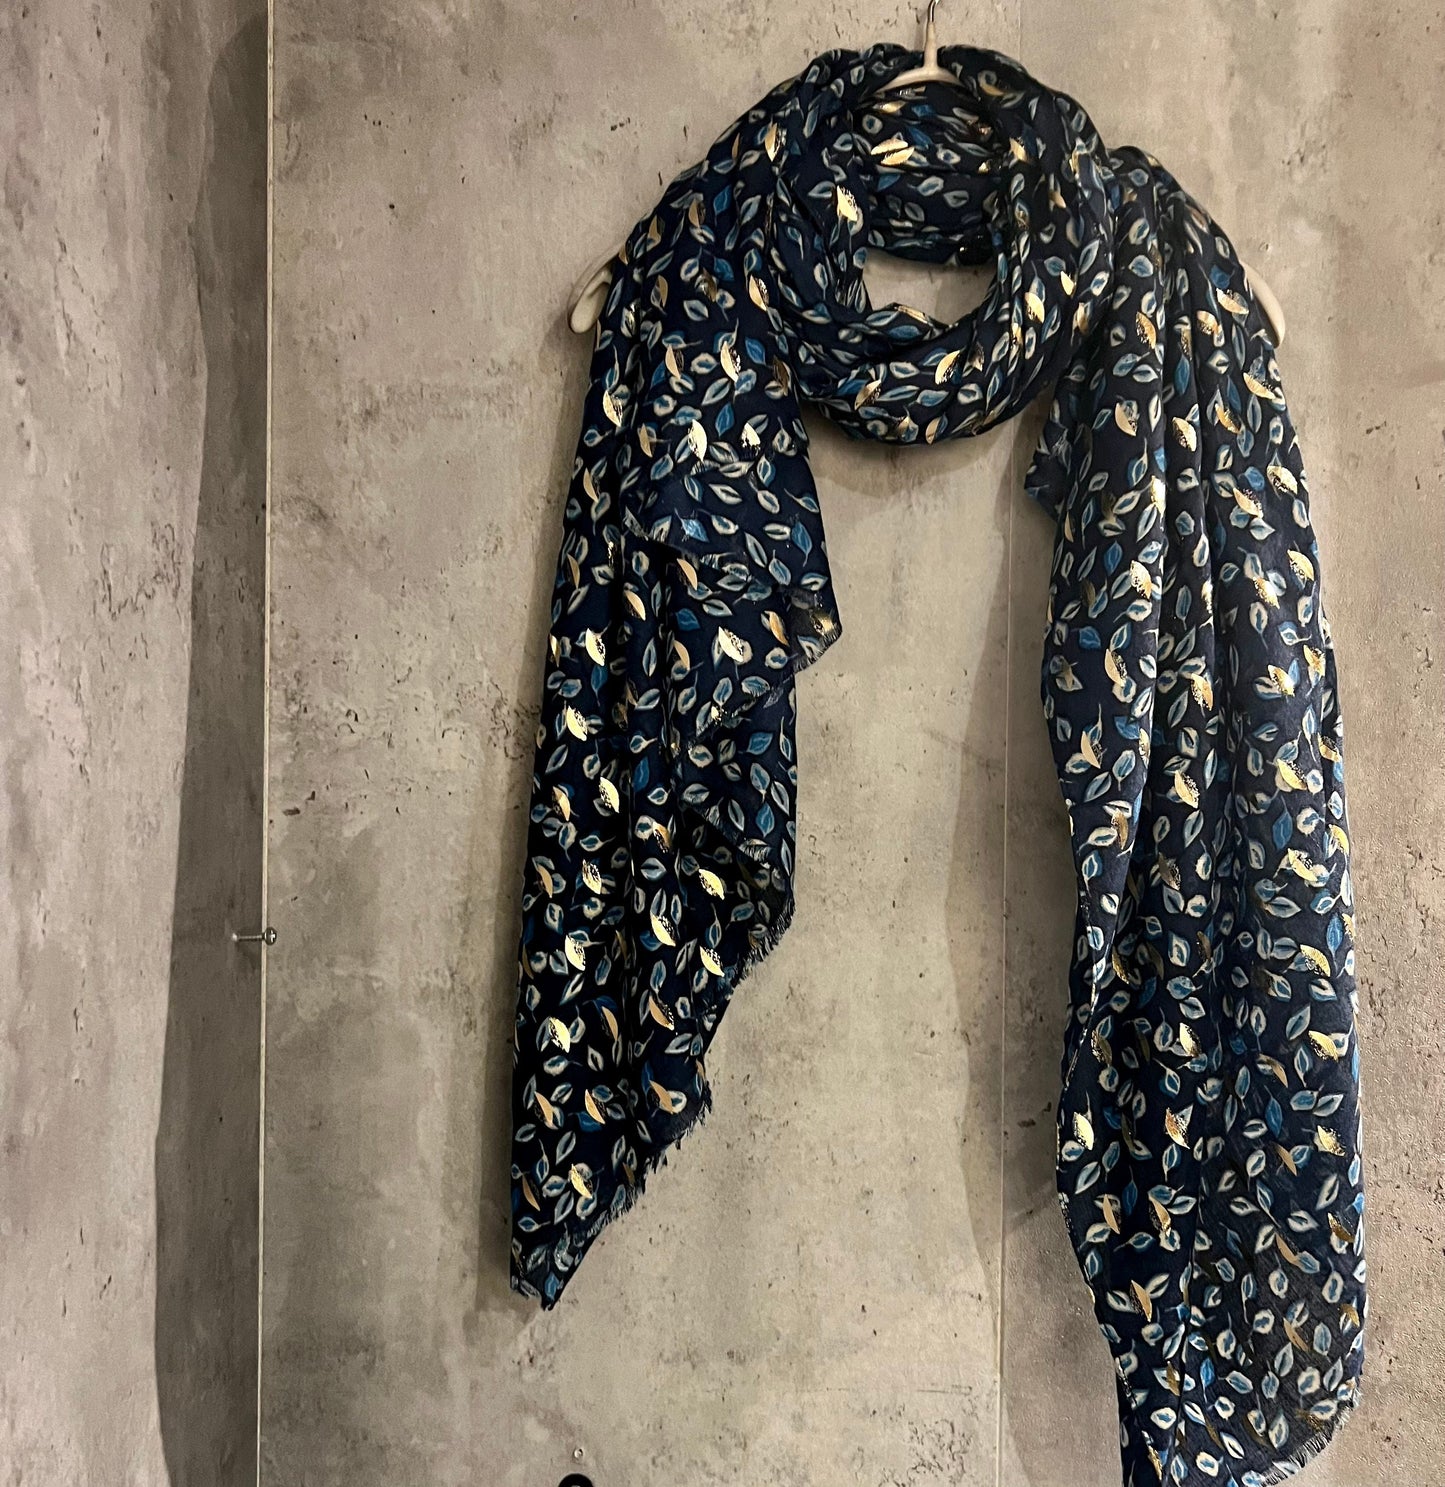 Seamless Small leaf’s With Gold Foil Blue Cotton Scarf/Summer Autumn Winter Scarf/Gifts For Mum/Gifts For Her Birthday Christmas/UK Seller